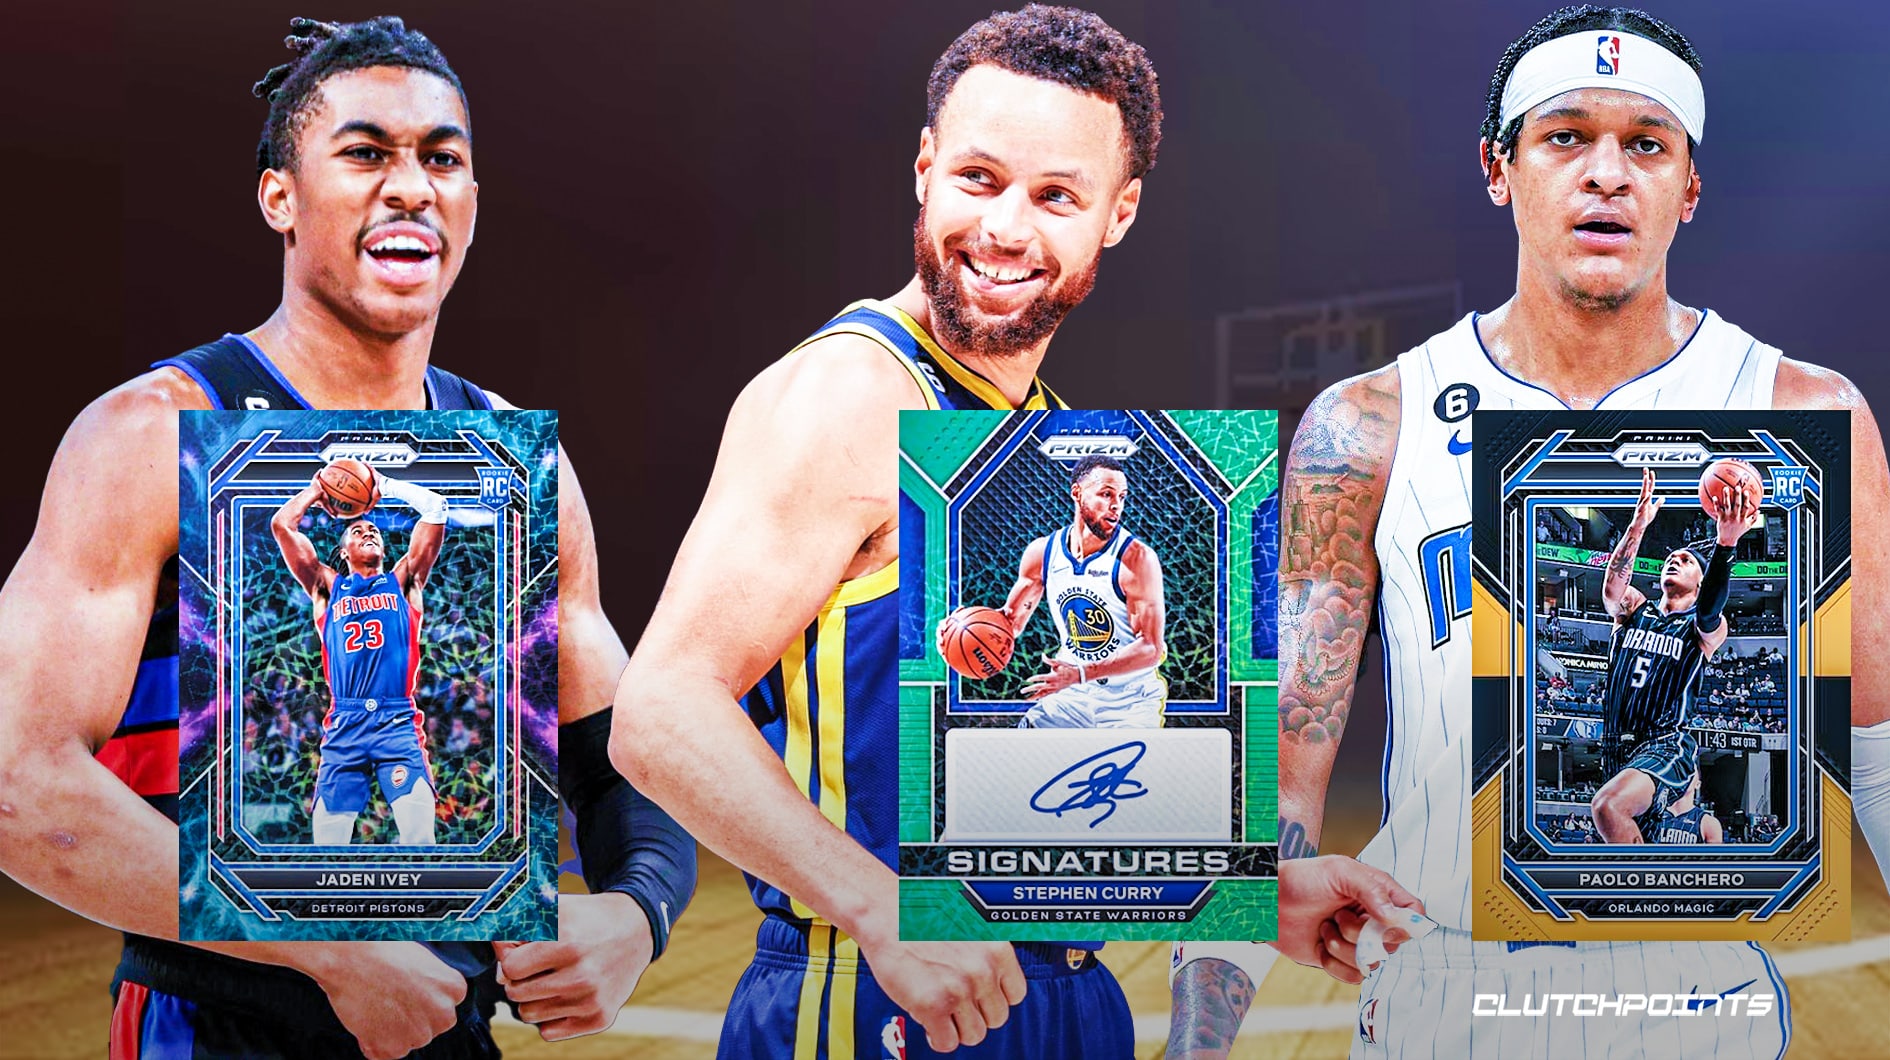 First impressions on the new 2022-23 Panini Prizm NBA card set